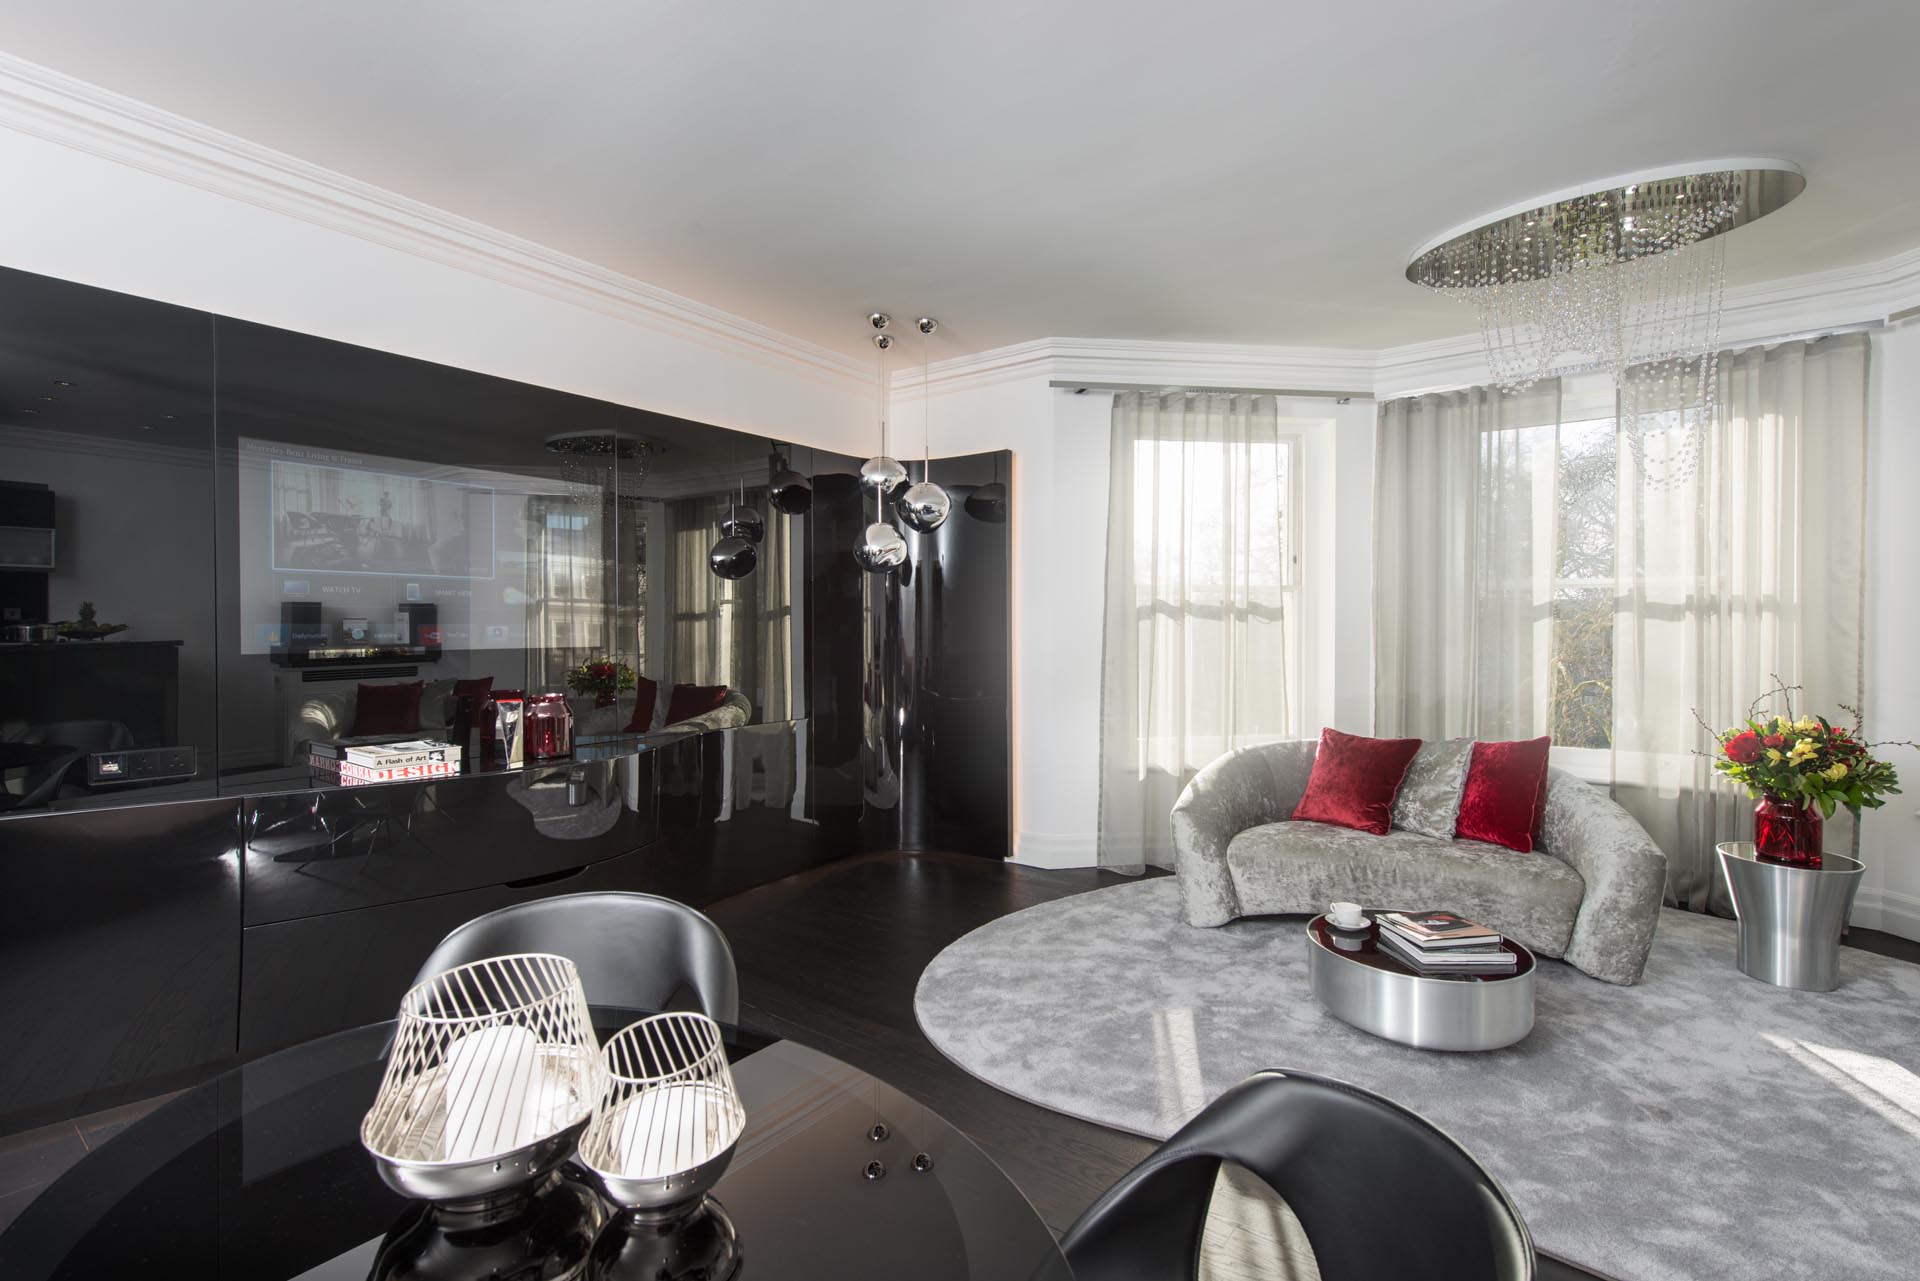 Two Bedroom Signature apartment at Fraser Suites Kensington